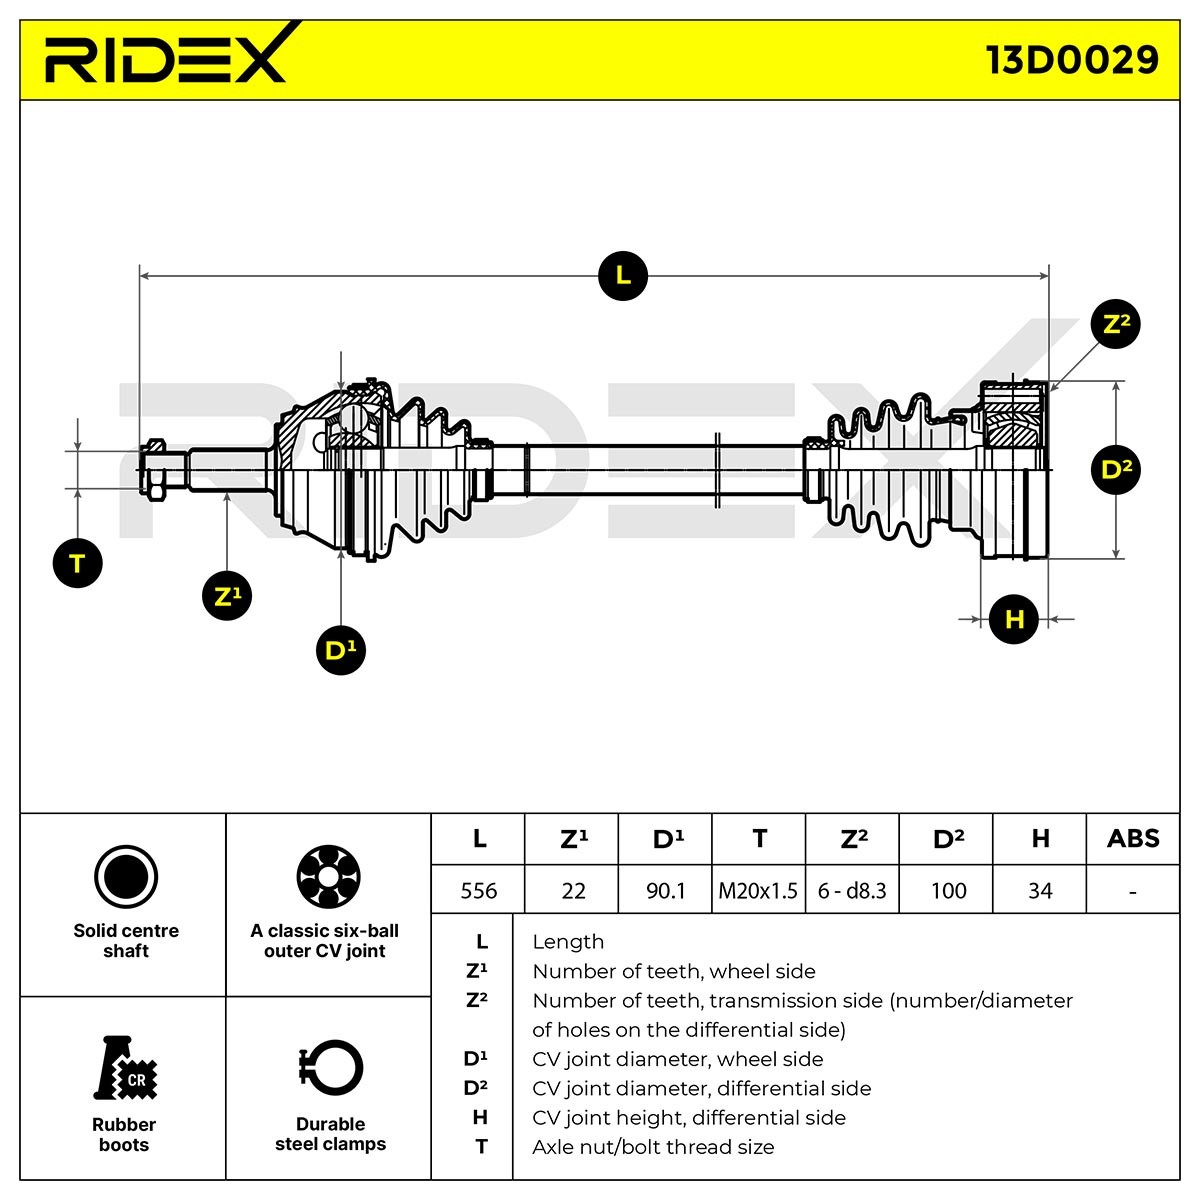 Drive shaft 13D0029 from RIDEX